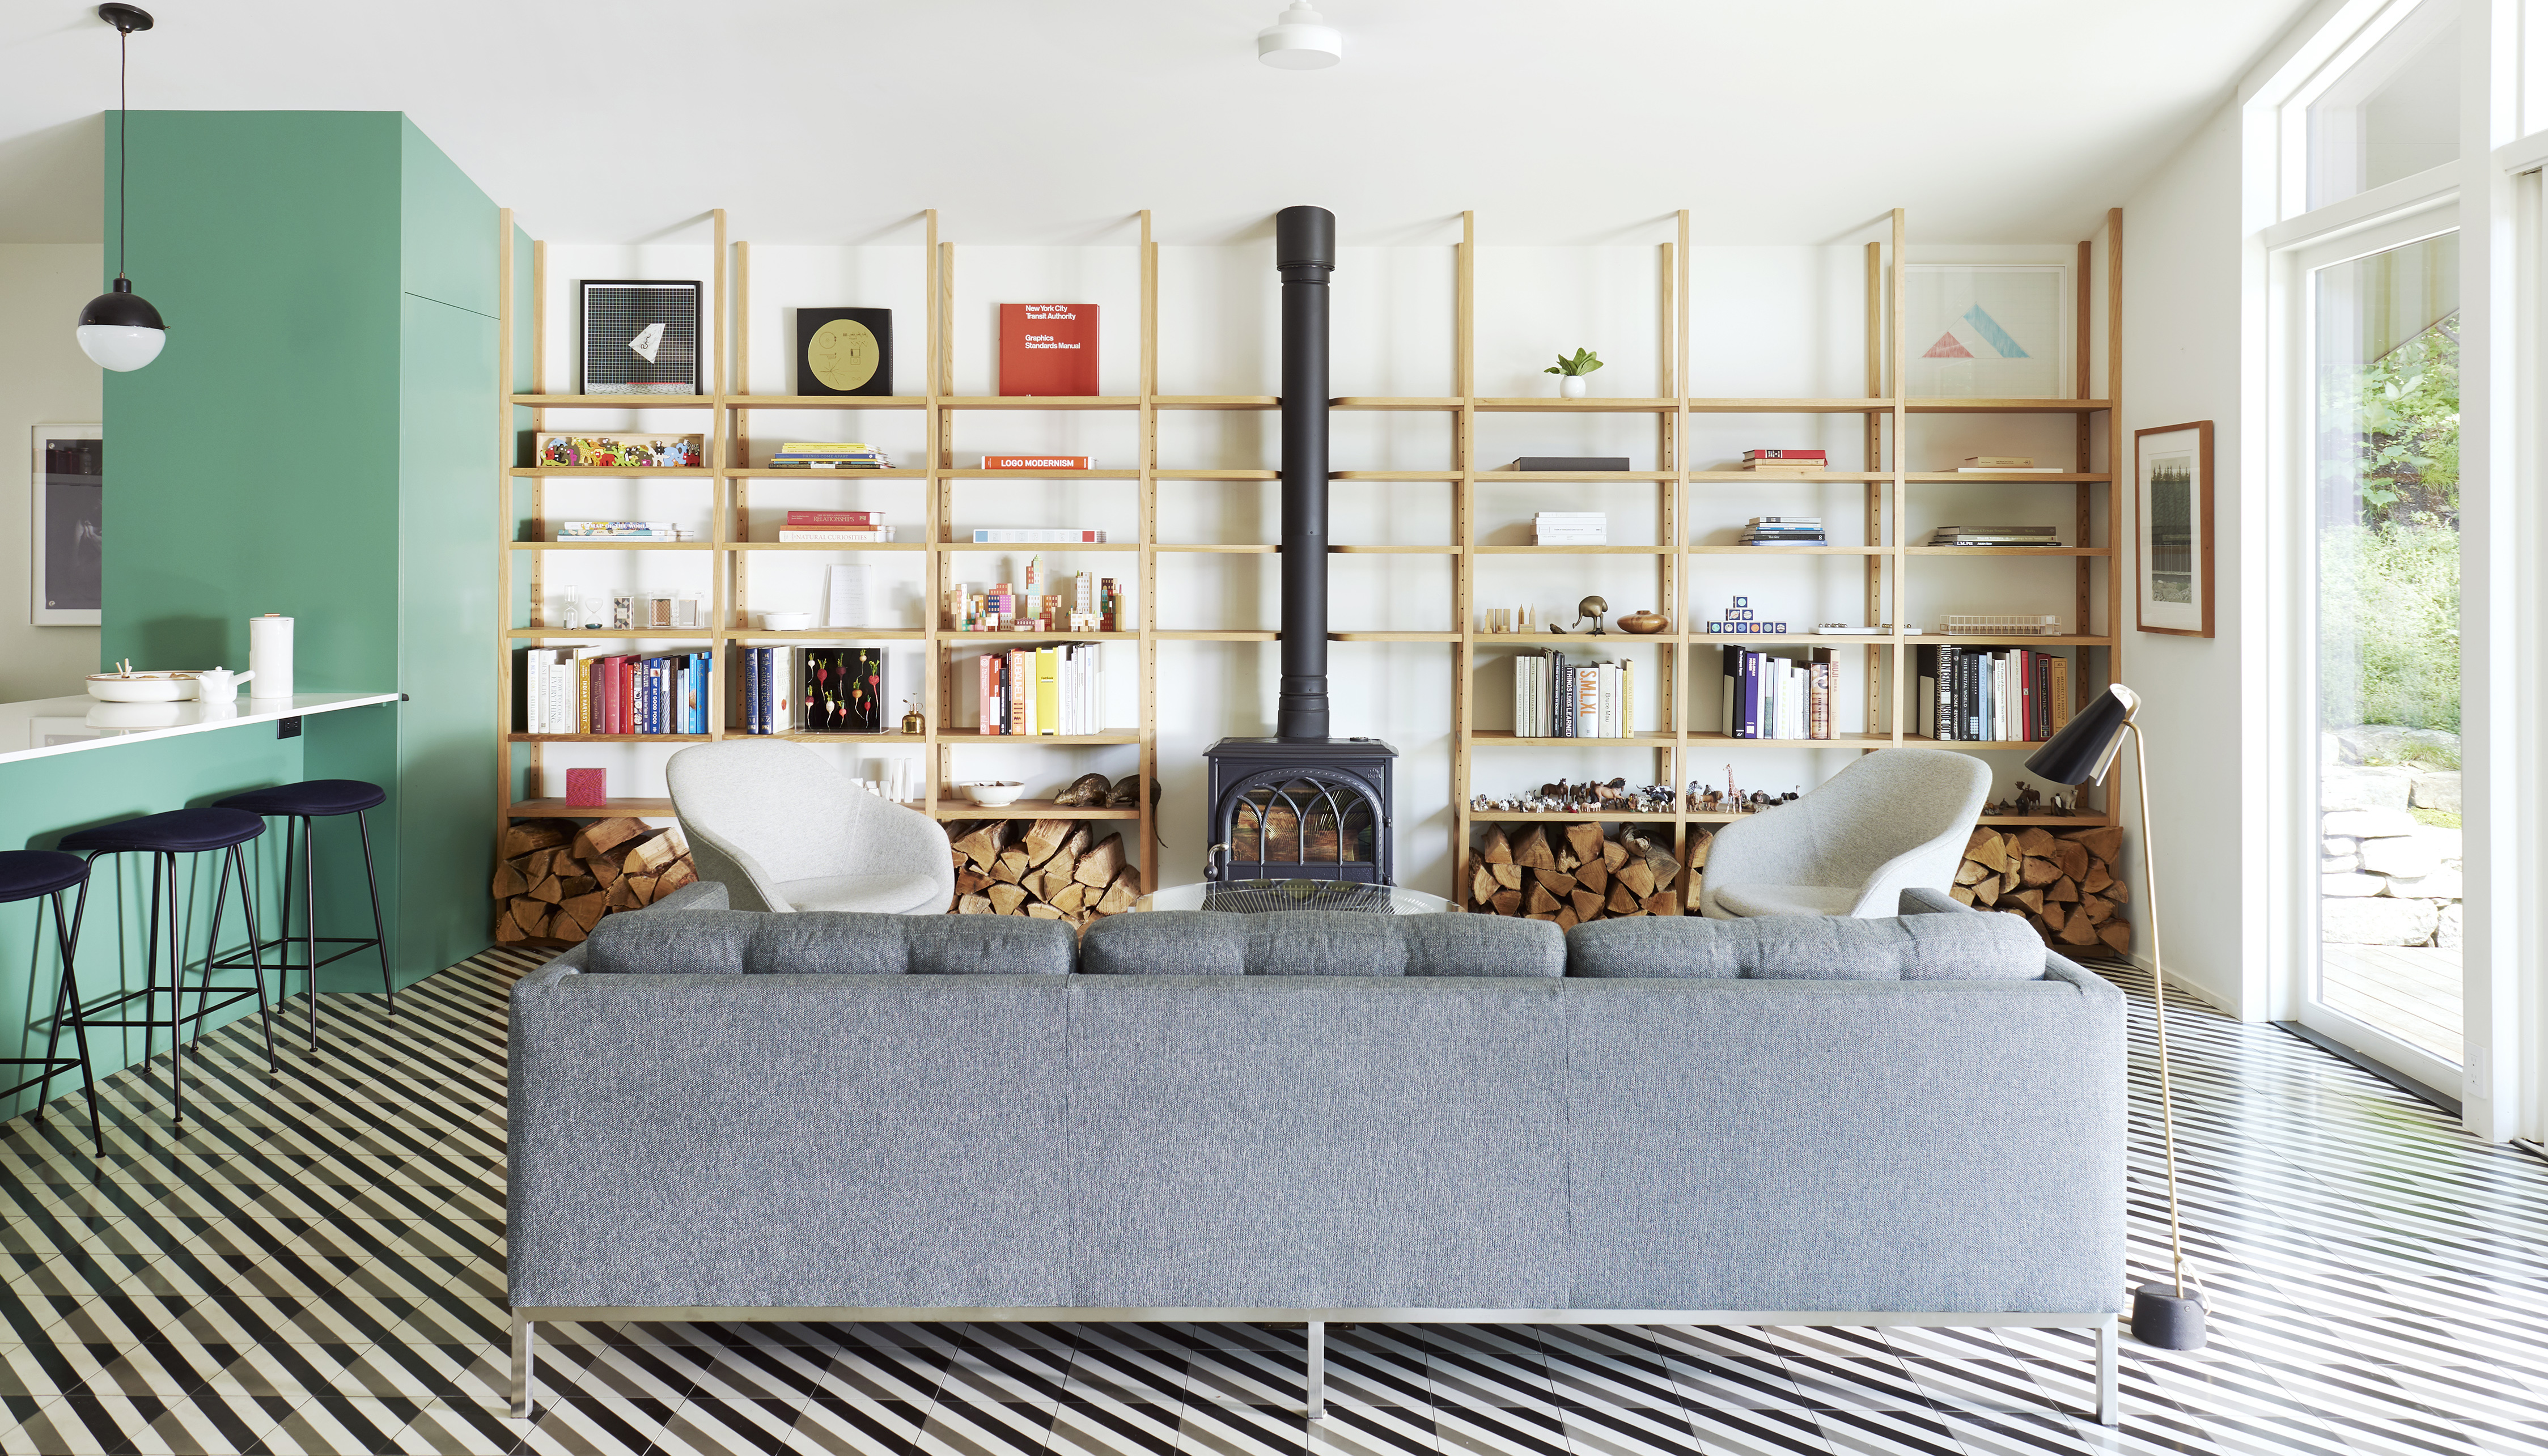 A grey couch sits in front of a living room with a wood burning stove as the focal point. To the stoves left and right are floor-to-ceiling wooden shelves that are minimally stacked with books, art, and colorful trinkets. The floor is a tiled diagonal white, grey and black striped pattern.